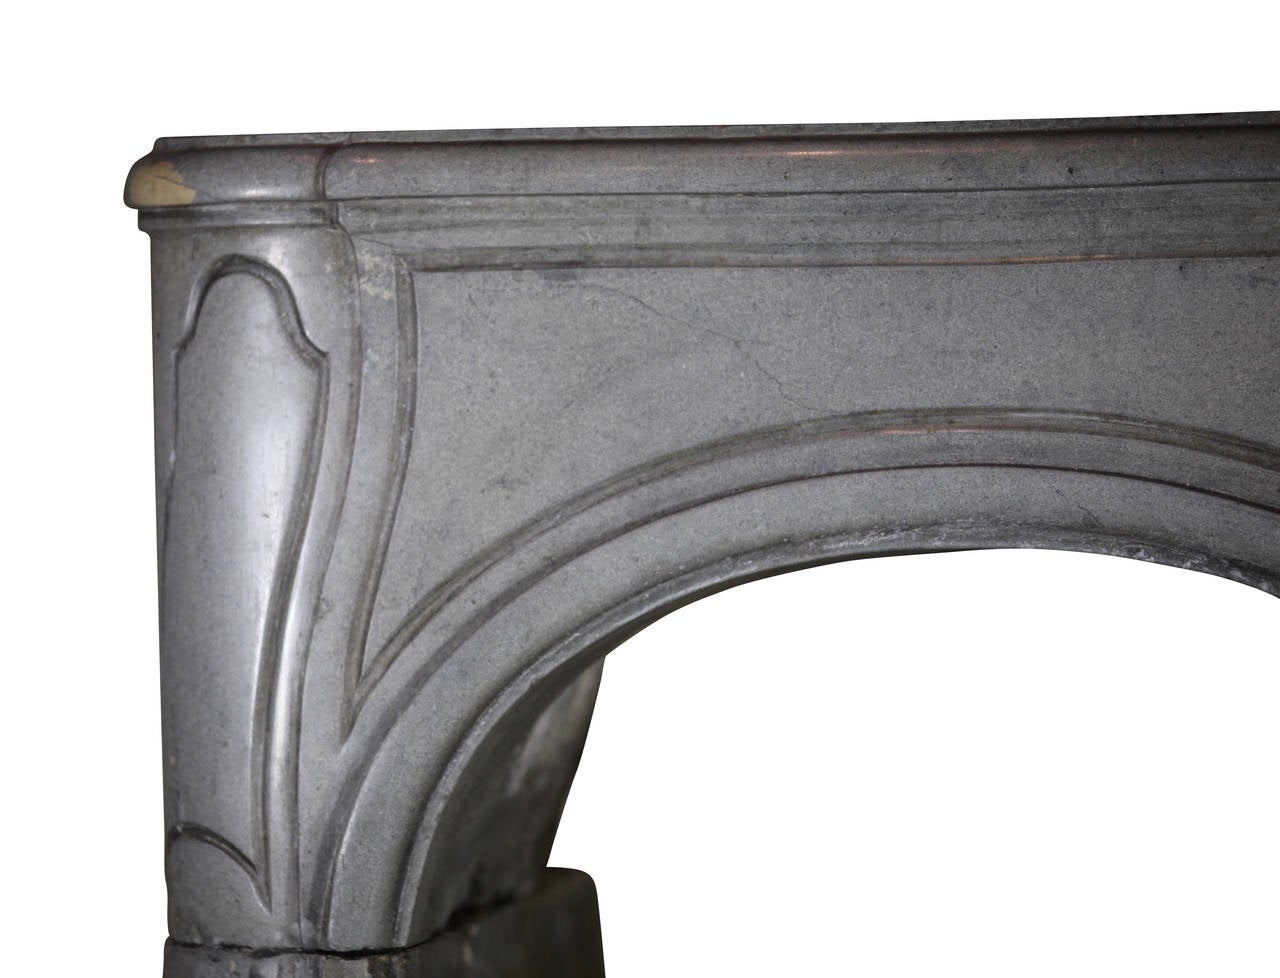 This 18th century fireplace surround was built in the Louis XIV period; it is one of two mantels. Both mantels are approximately same. There is only a small difference in the proportions of the two. Both mantles have rounded corners. The mantel